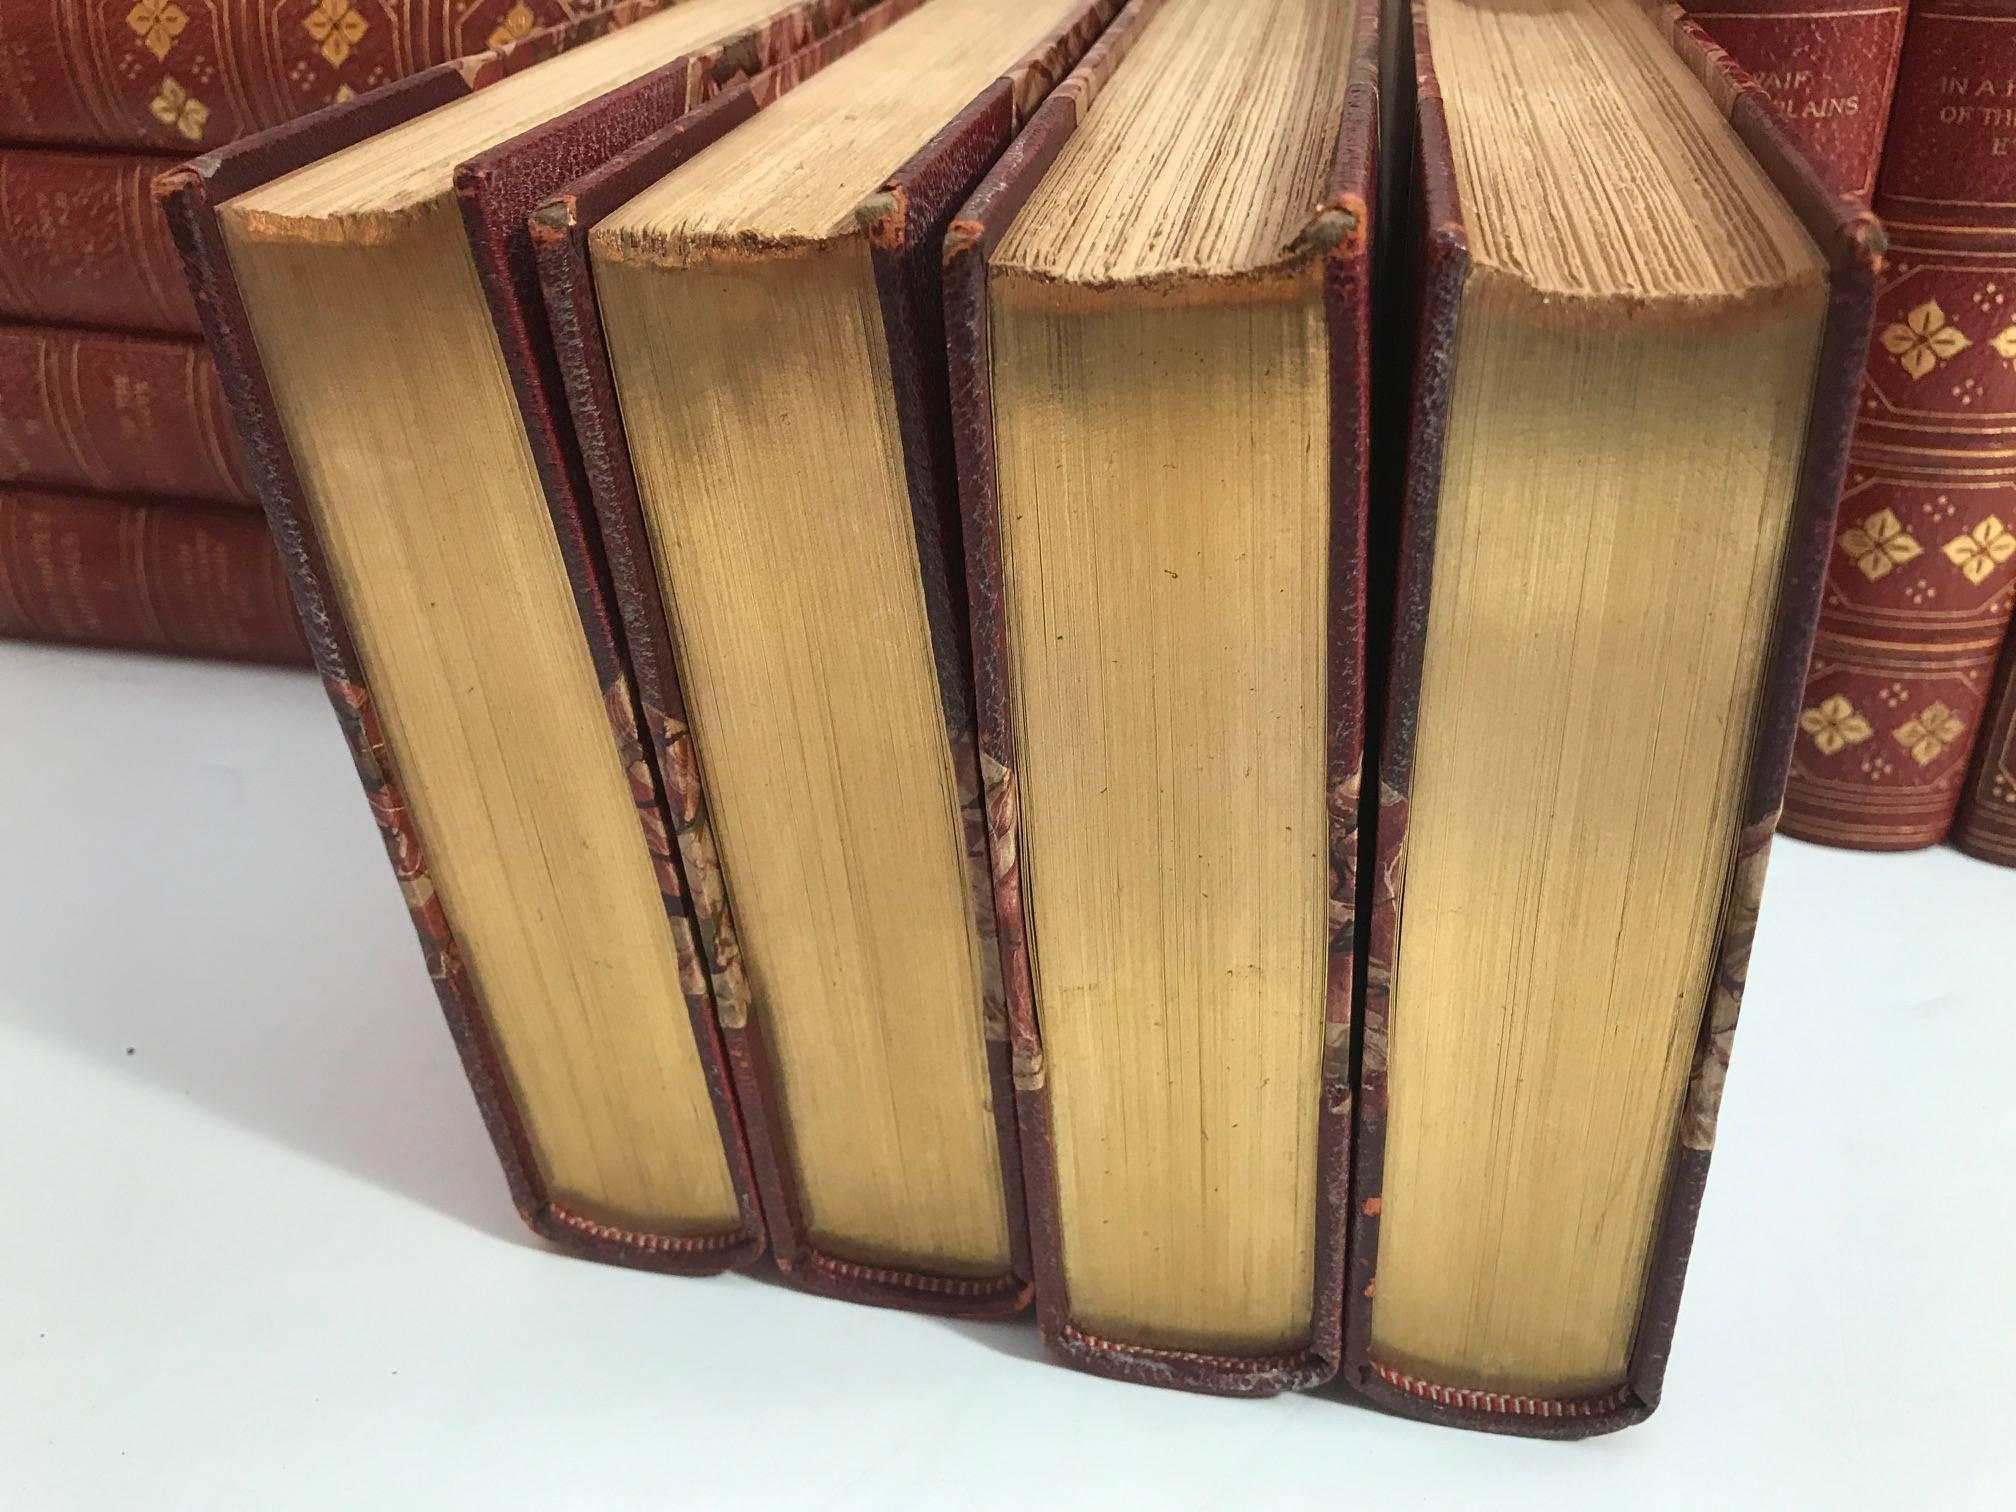 1903 Leather Bound Books, 19 Volumes Bret Harte's Writings 1